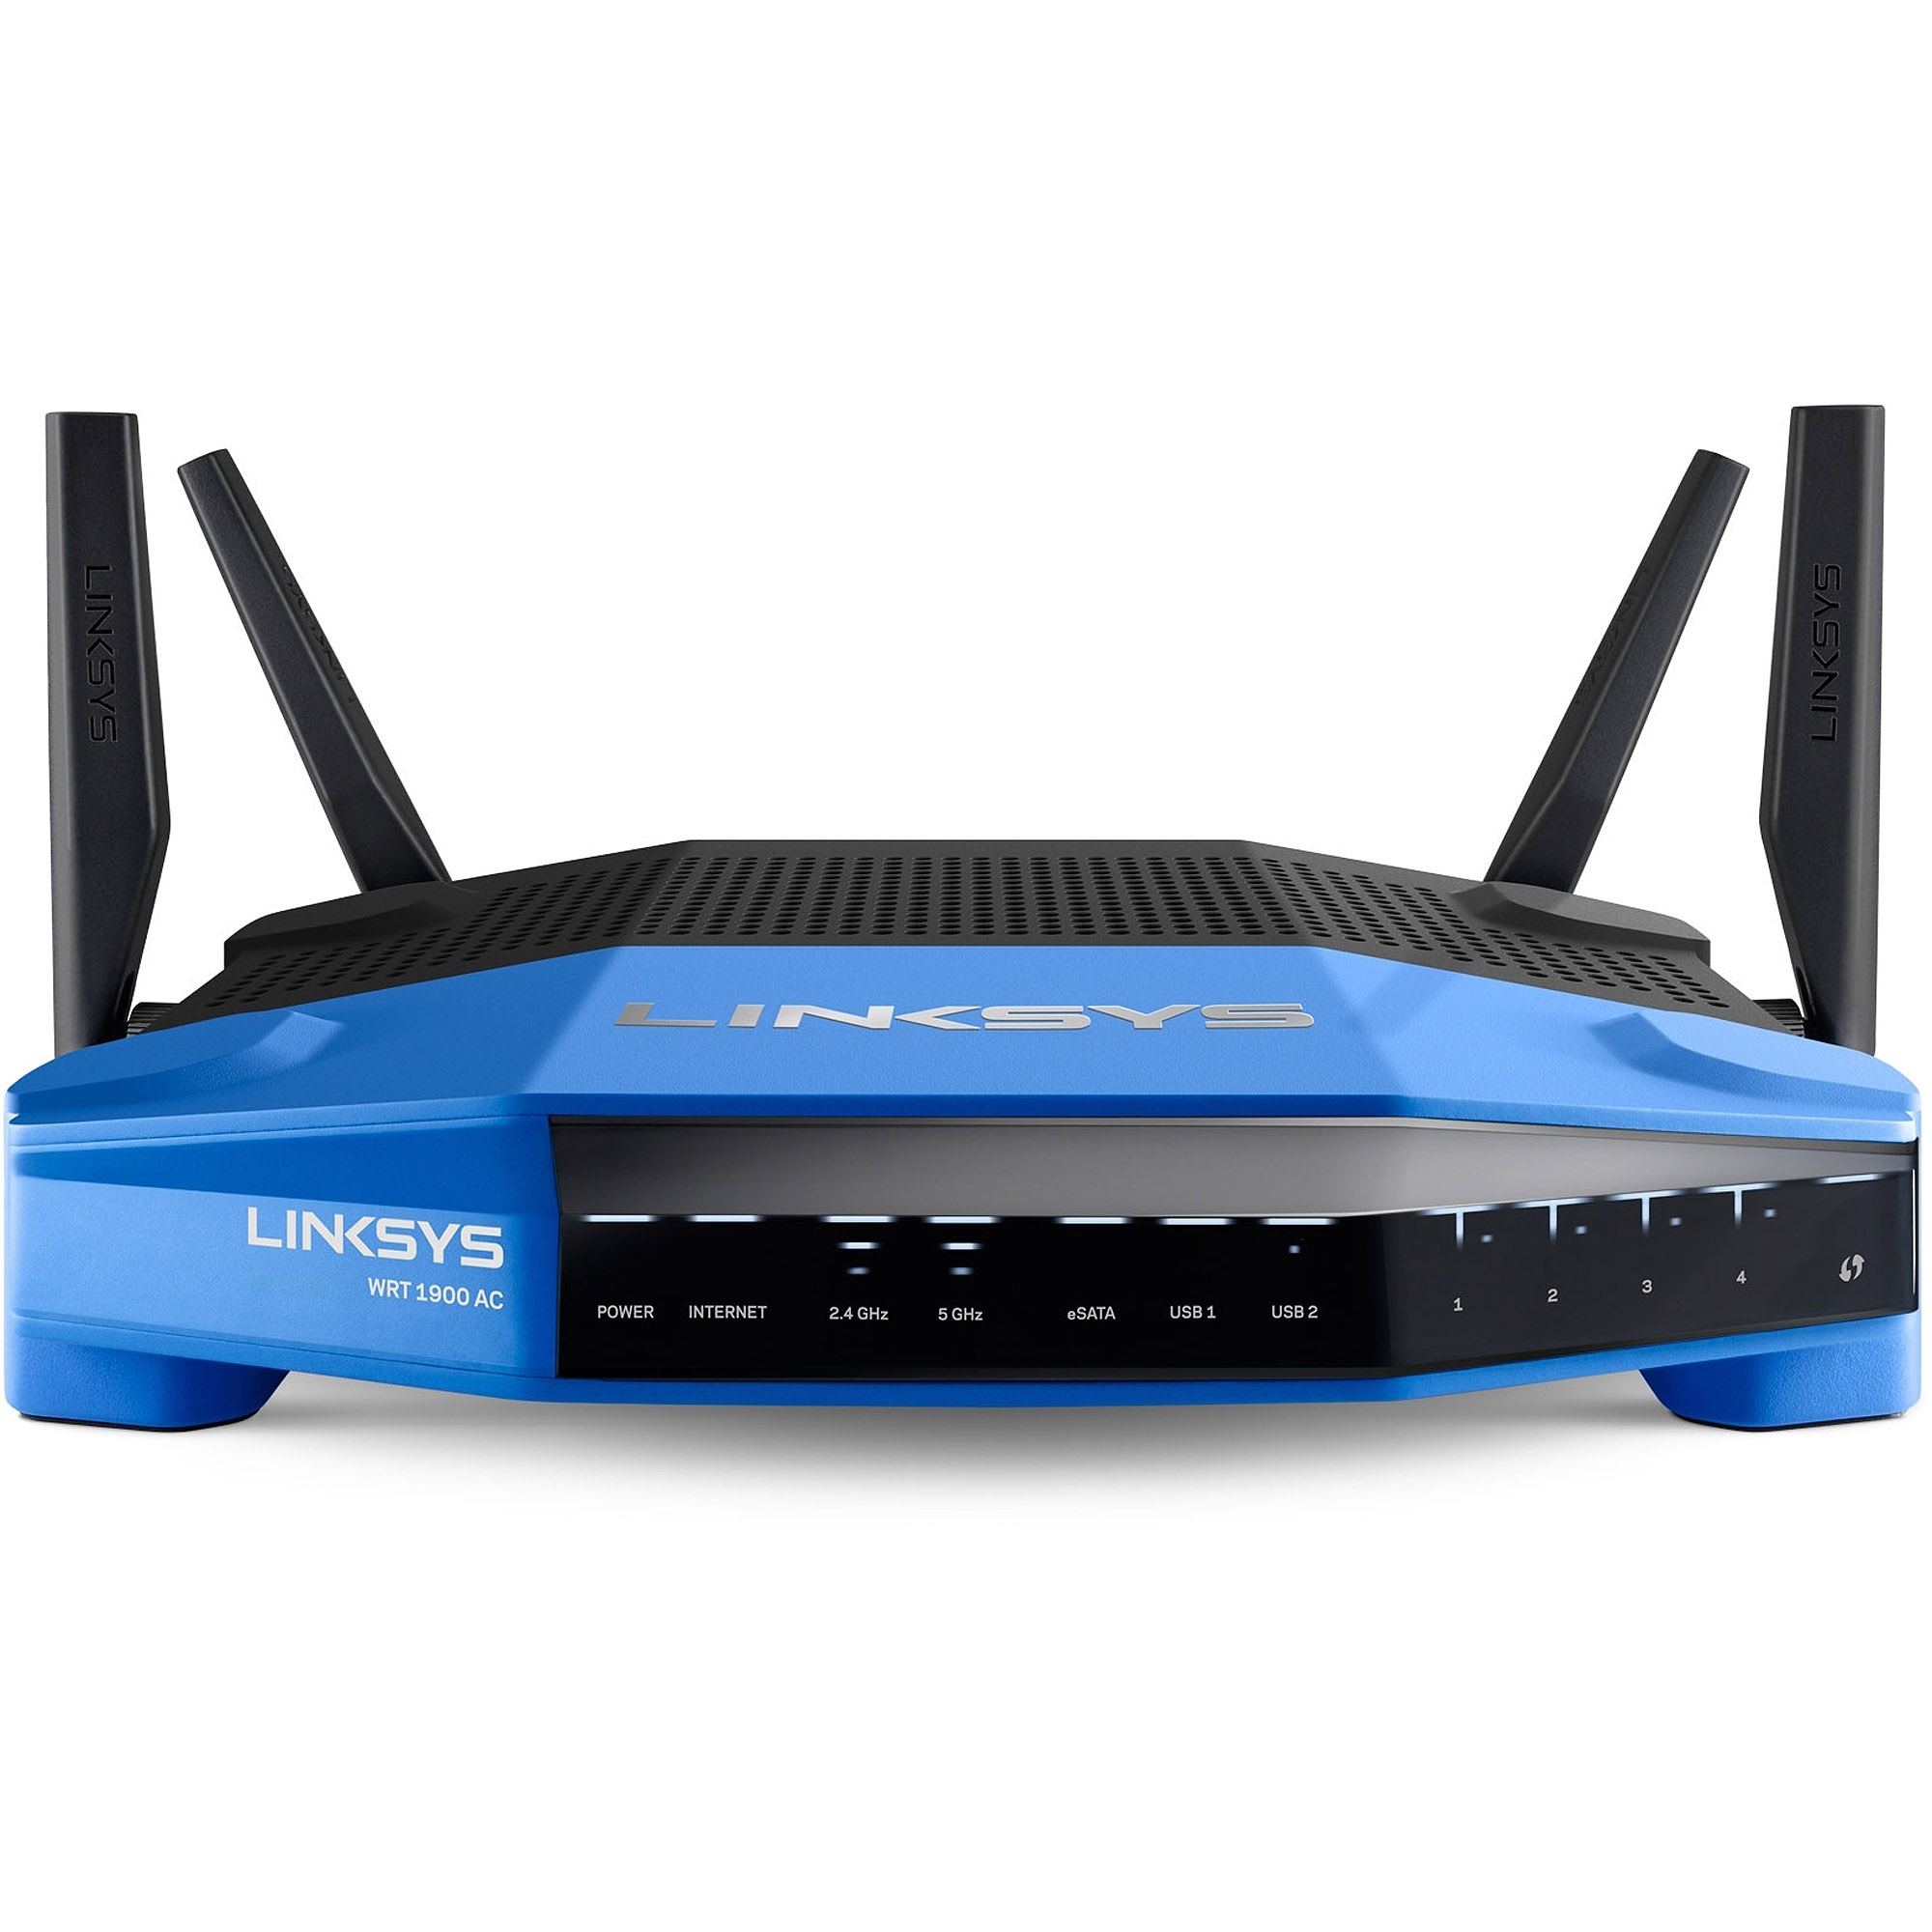 Linksys Dual-Band AC1900 Wireless Wi-Fi Router (WRT1900AC) - image 1 of 4